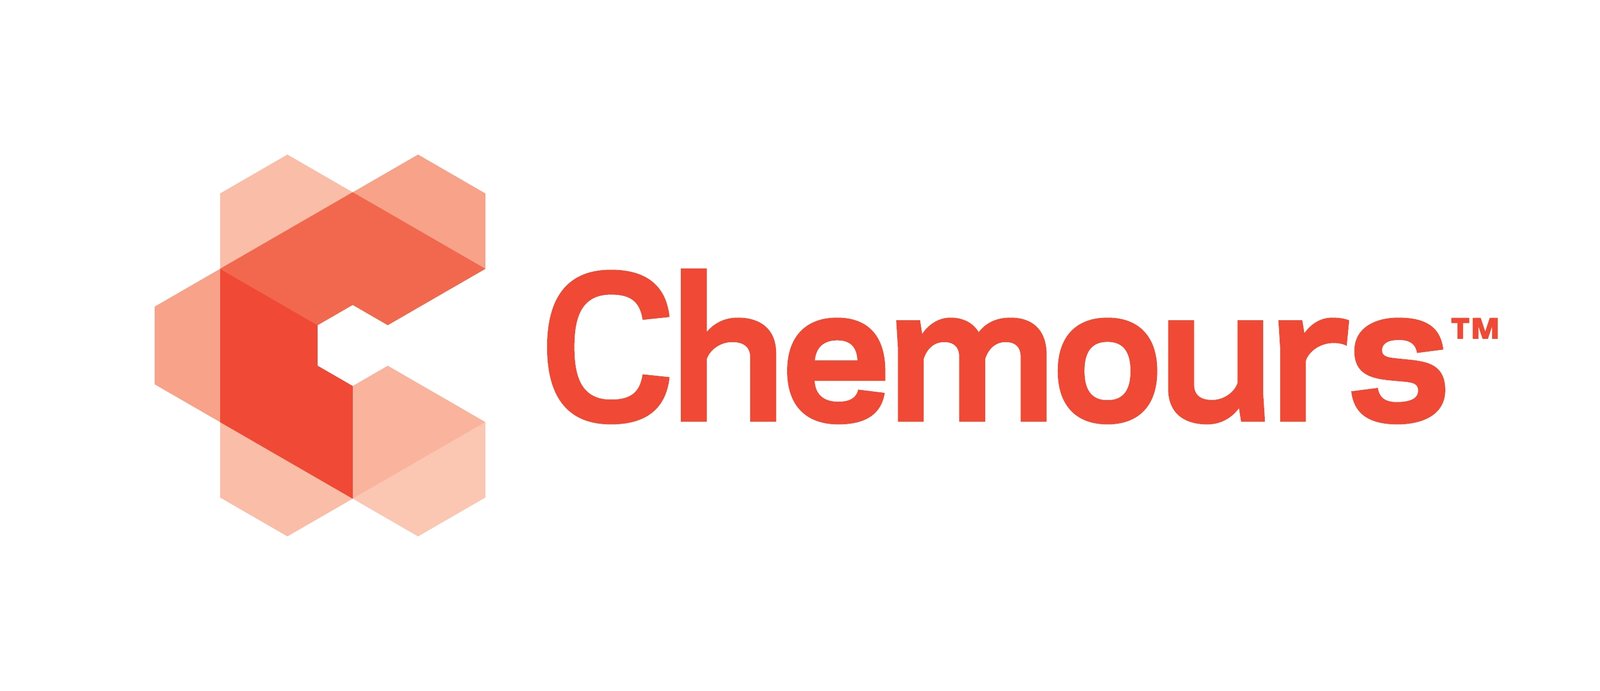 The Chemours Company